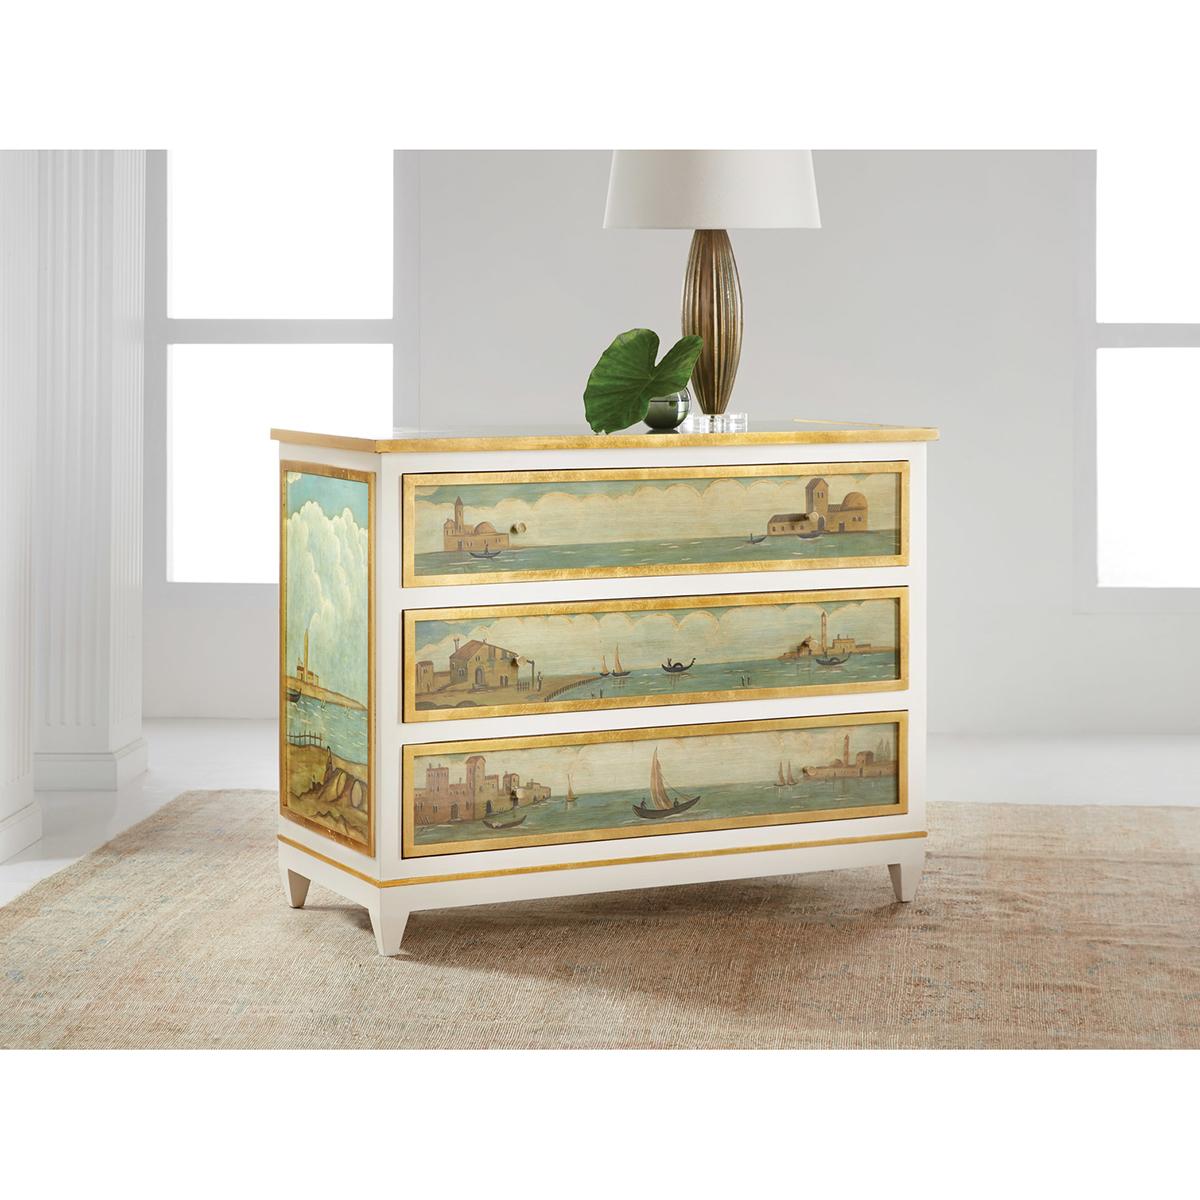 Classic Dresser, with beautifully hand-painted Italian harbor and coastal scenes in an 18th-century style. With three long drawers and painted case frames with gilded trim details. Raised on four short square tapered legs.

Dimensions: 46